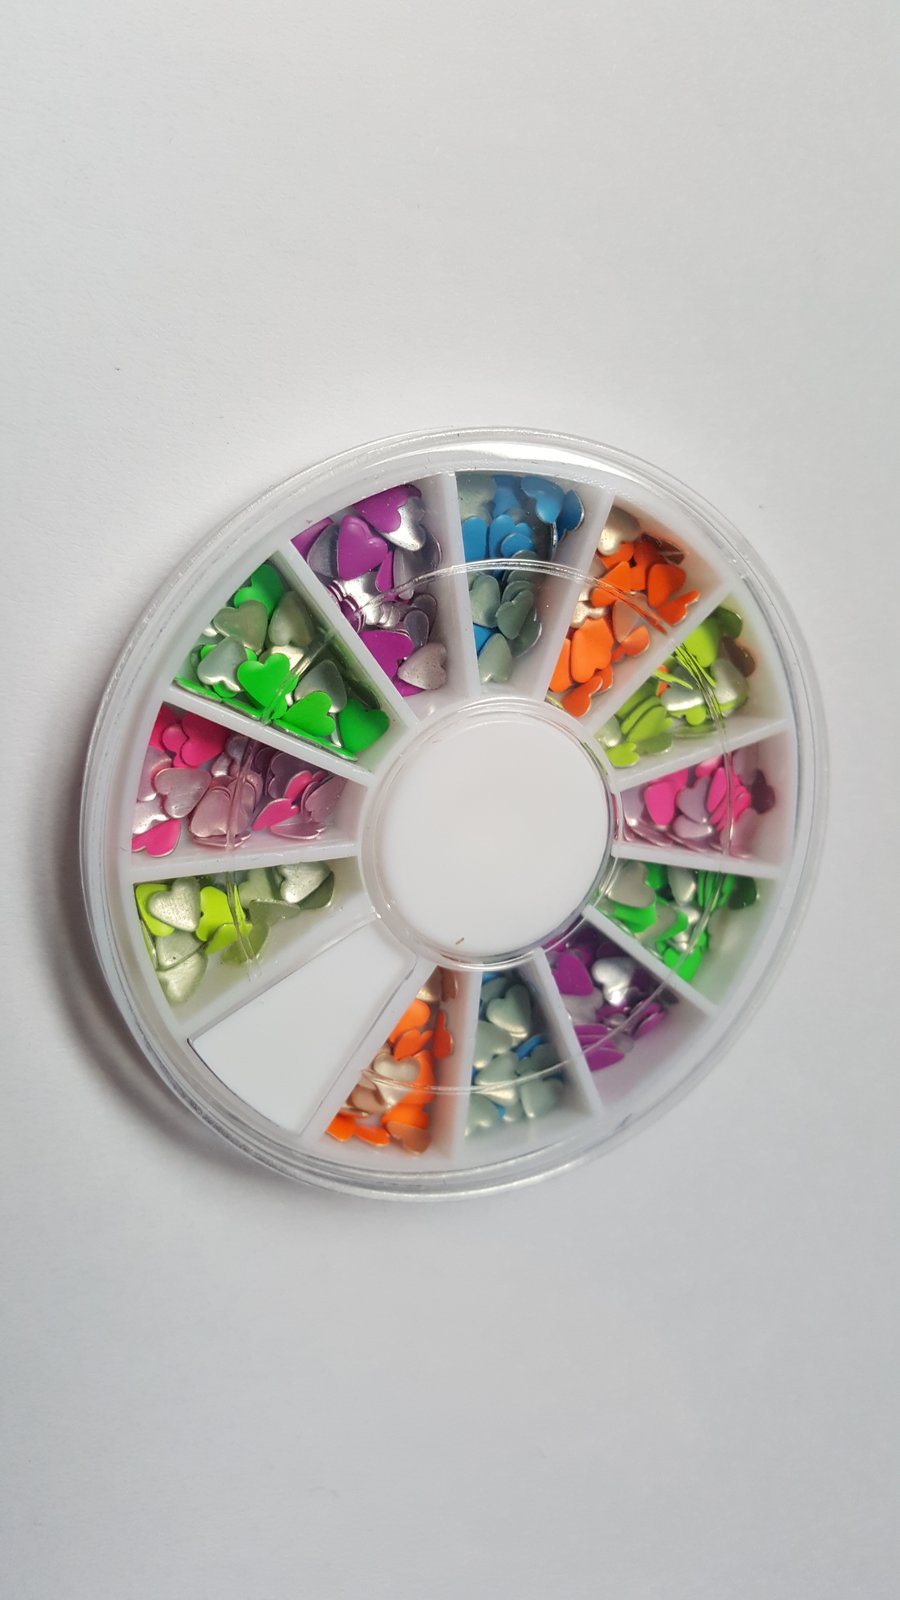 1 x Filled Storage Wheel - 6cm - 4mm Heart Studs - Mixed Colour 